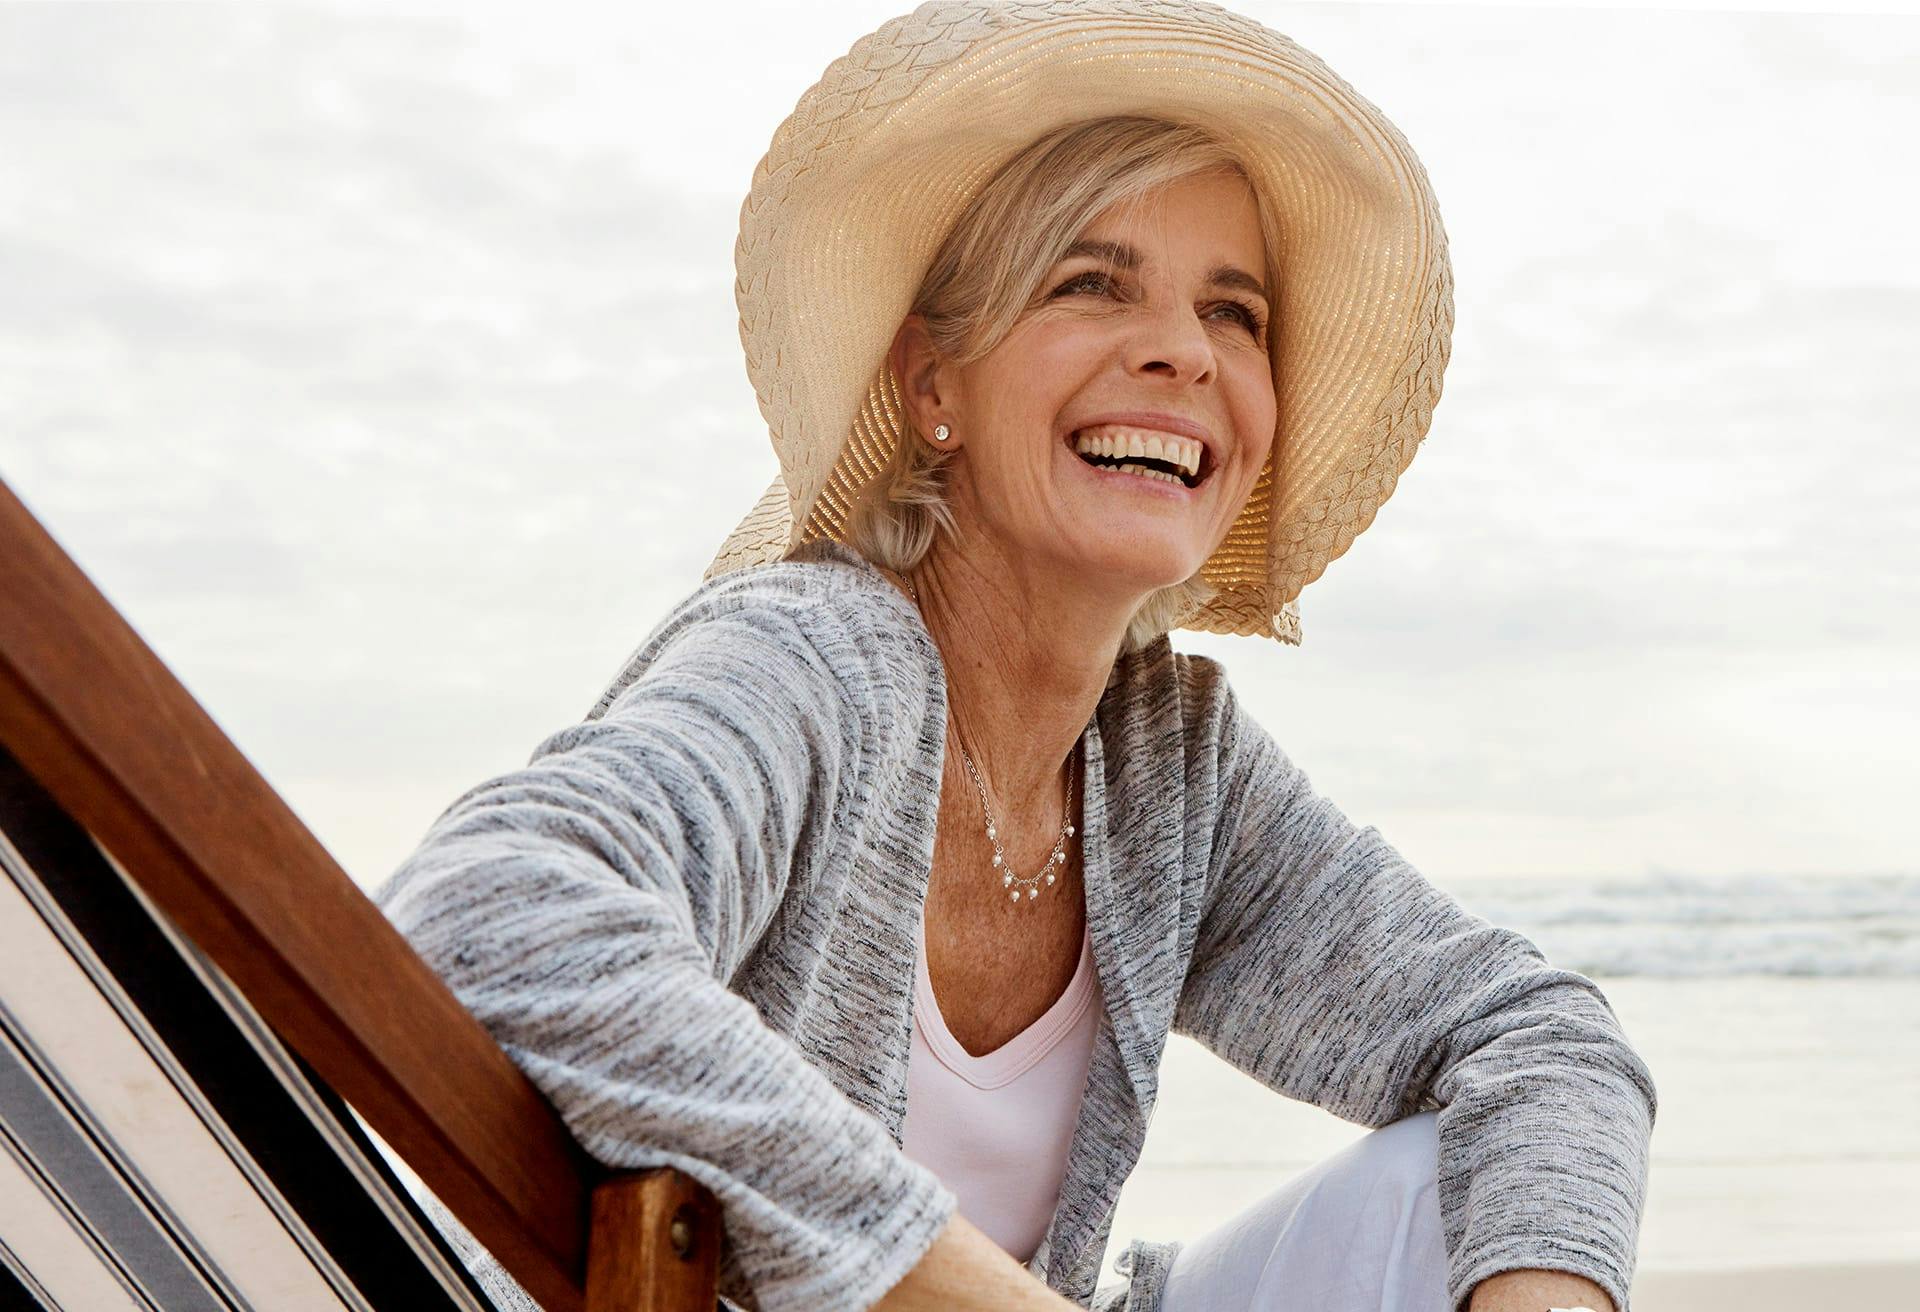 Woman with a hat on next to the ocean, smiling